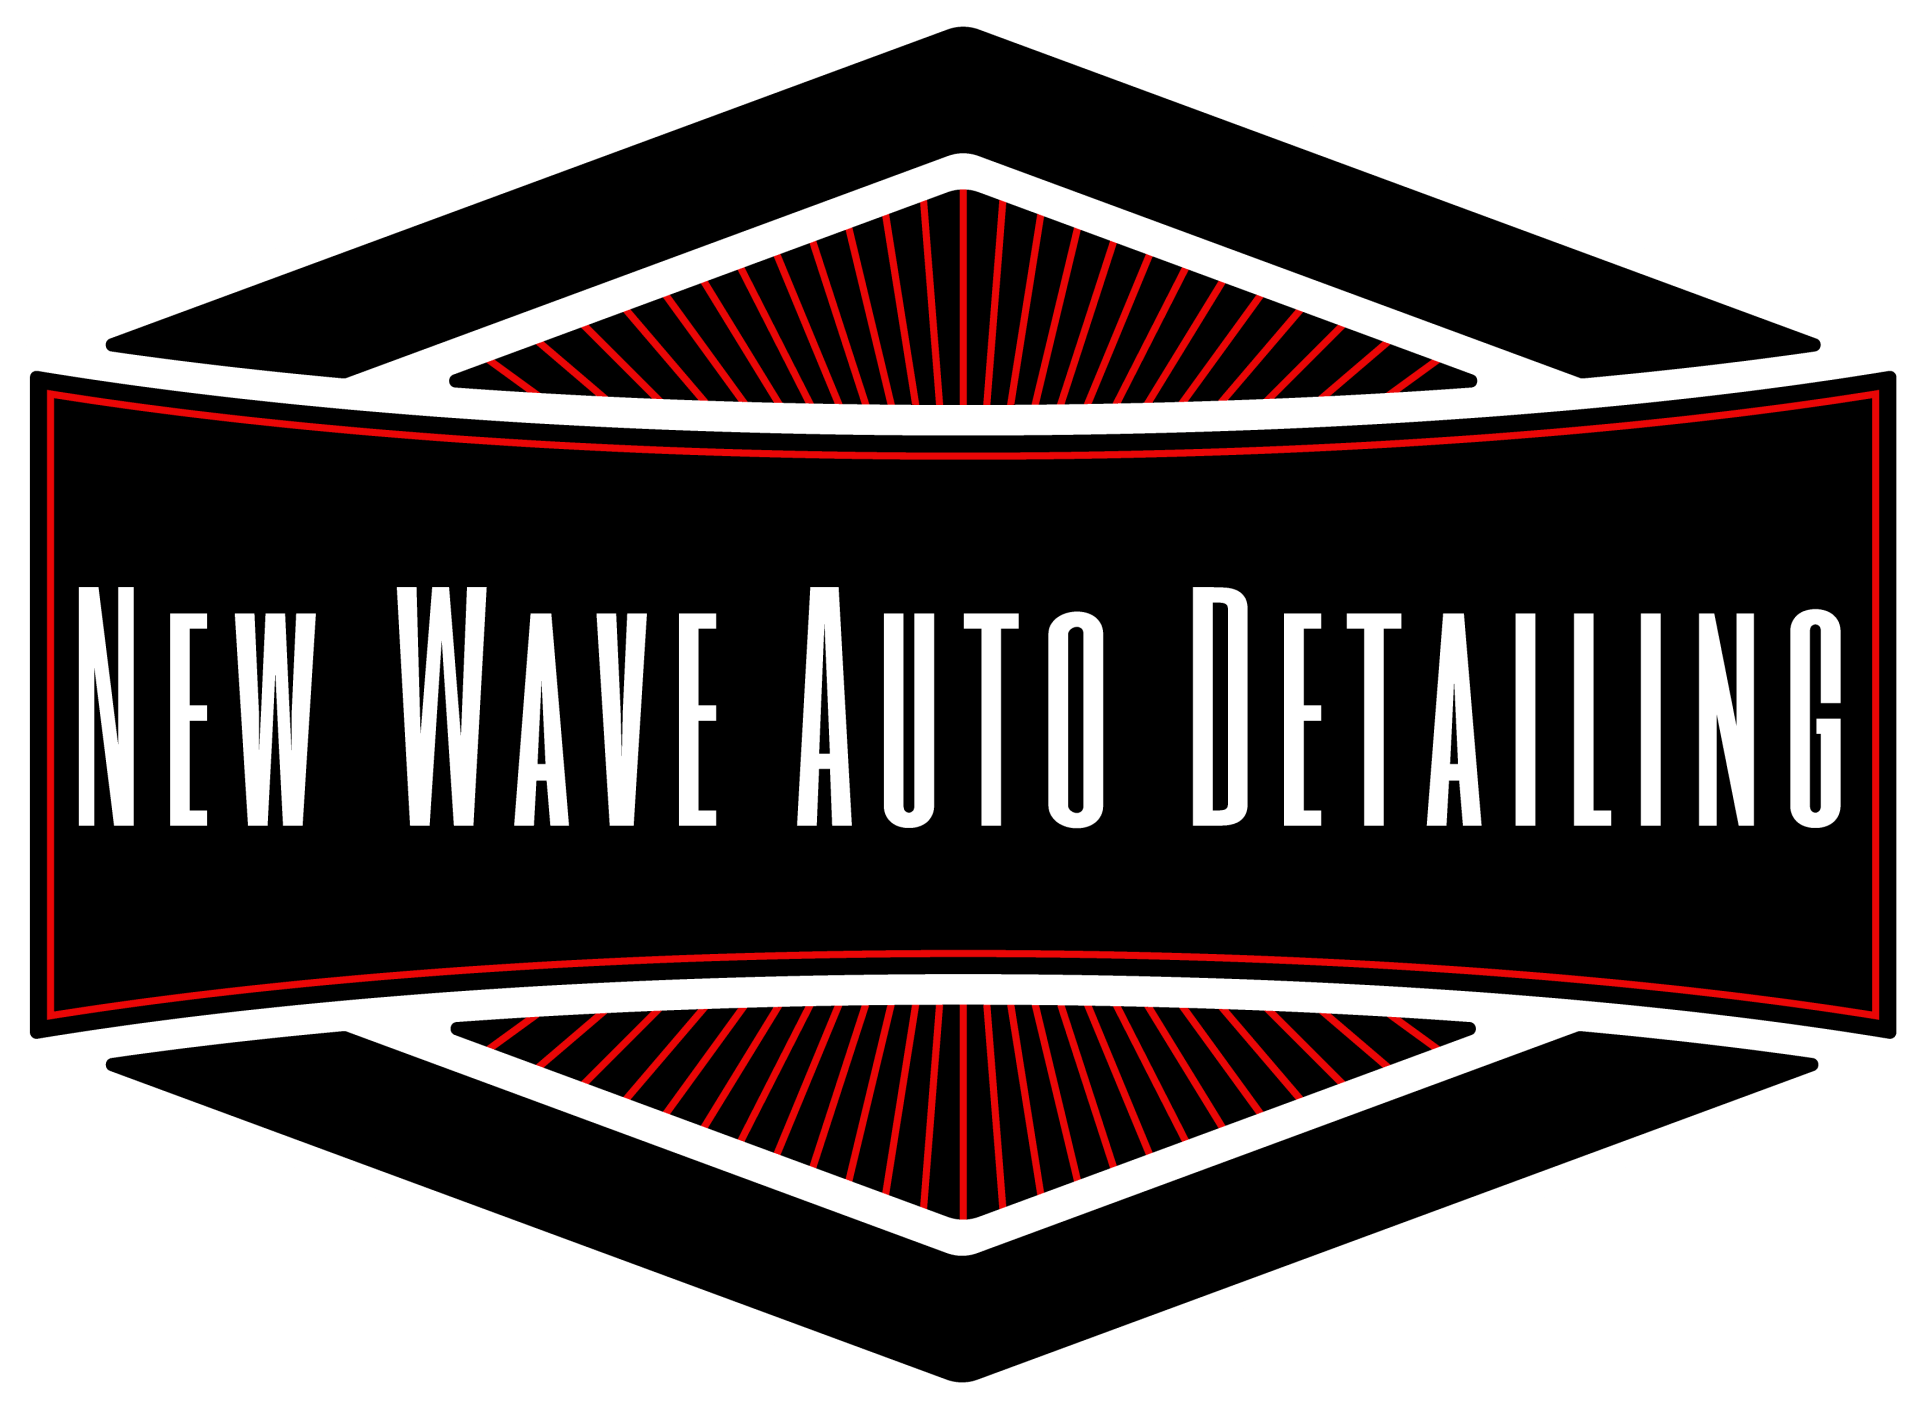 New Wave Auto Detailing